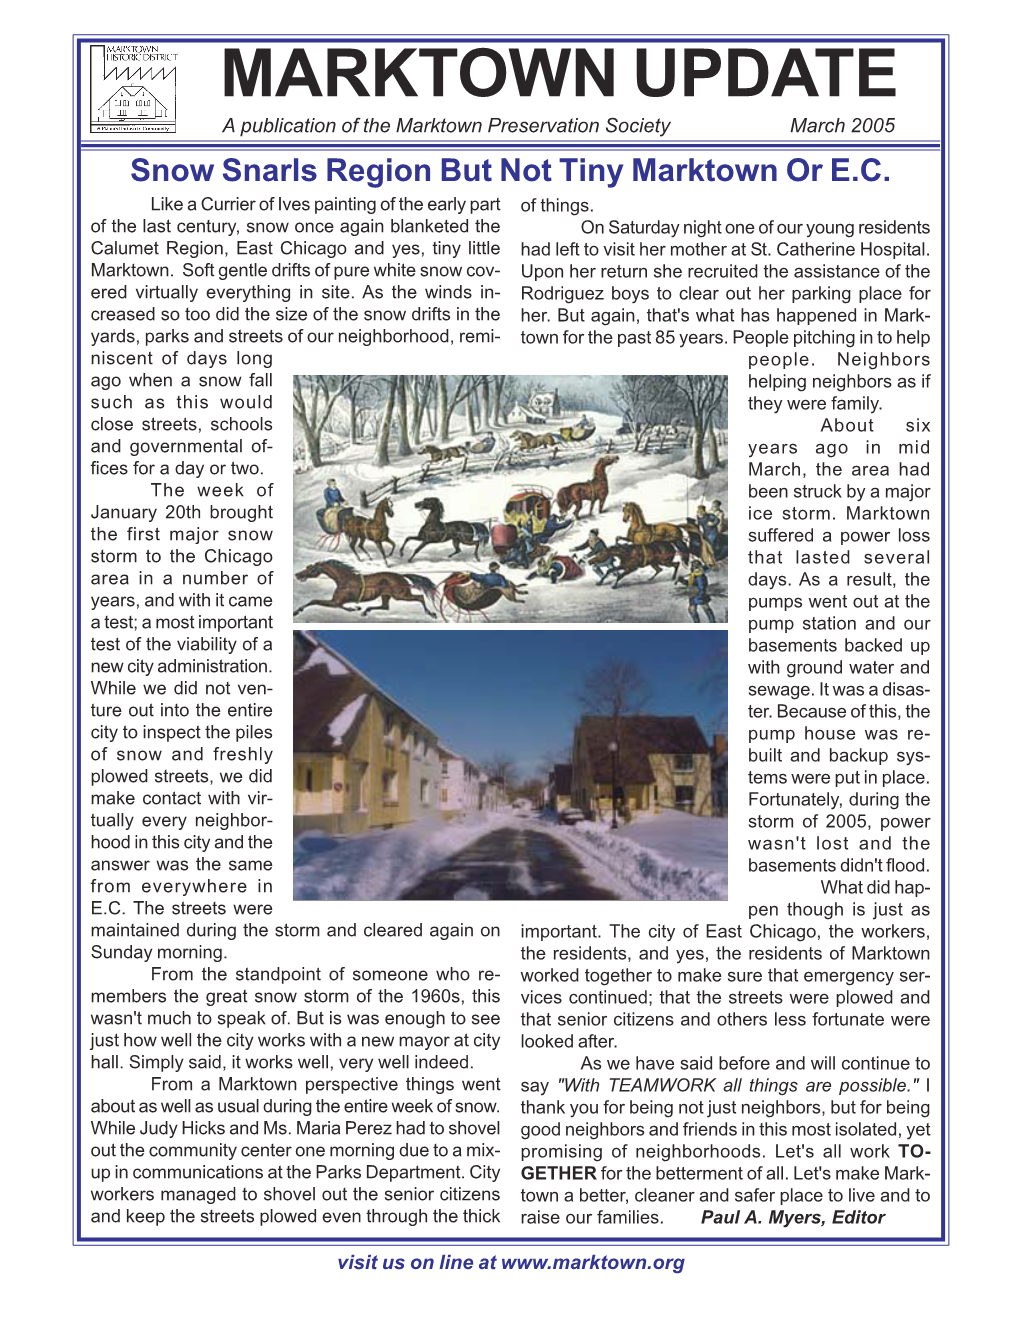 MARKTOWN UPDATE a Publication of the Marktown Preservation Society March 2005 Snow Snarls Region but Not Tiny Marktown Or E.C